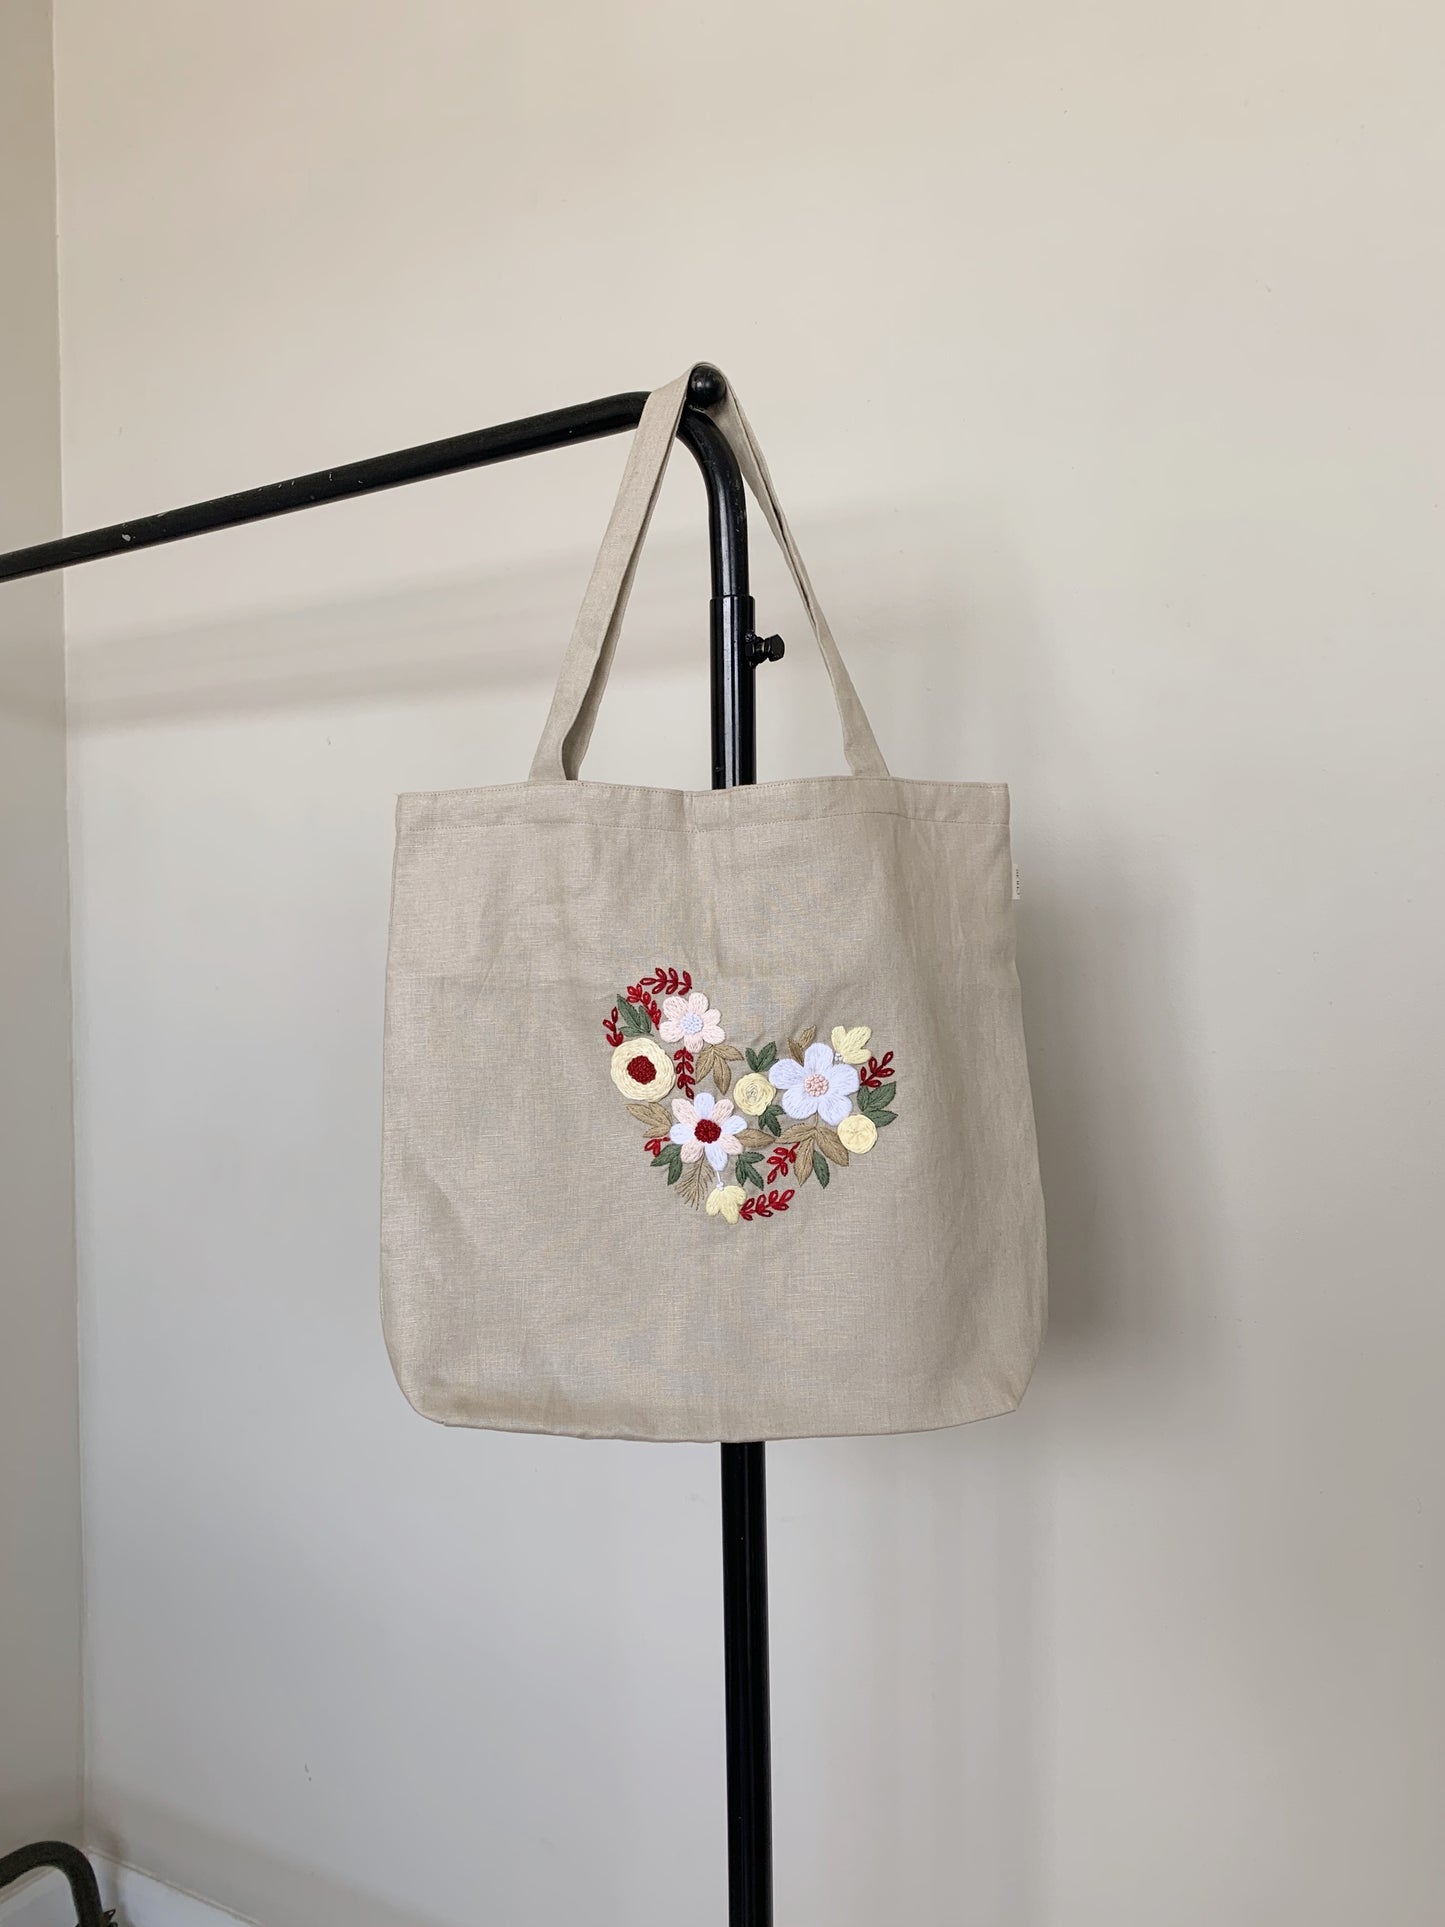 The Hand Embroidery Linen Canvas Tote Bag with Heart Floral Bouquet embroidery